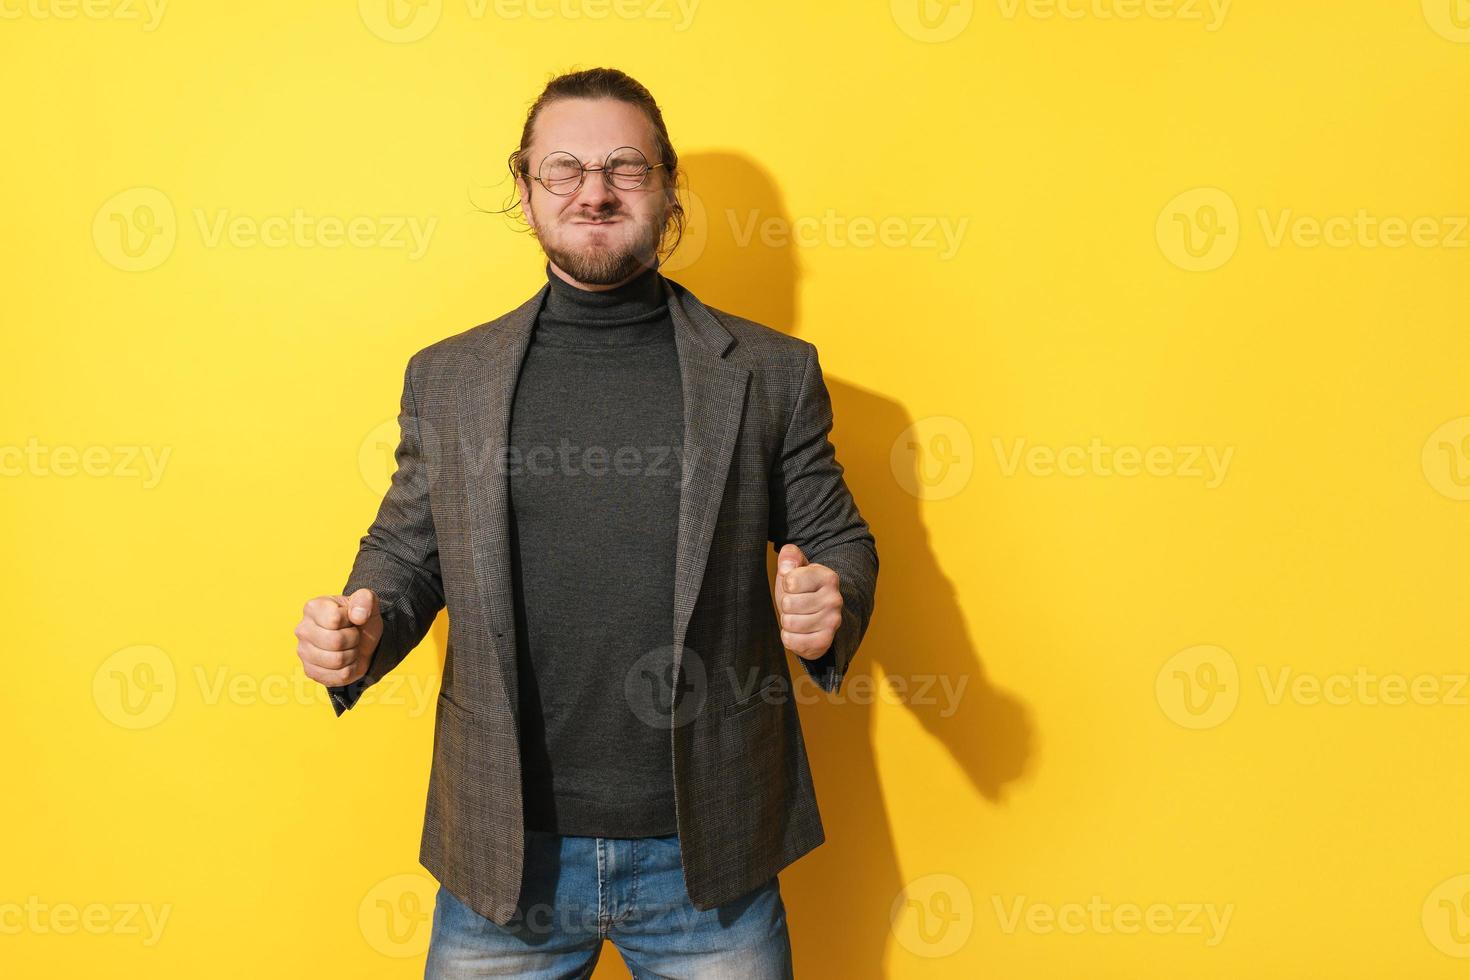 Man making silly face against yellow background photo